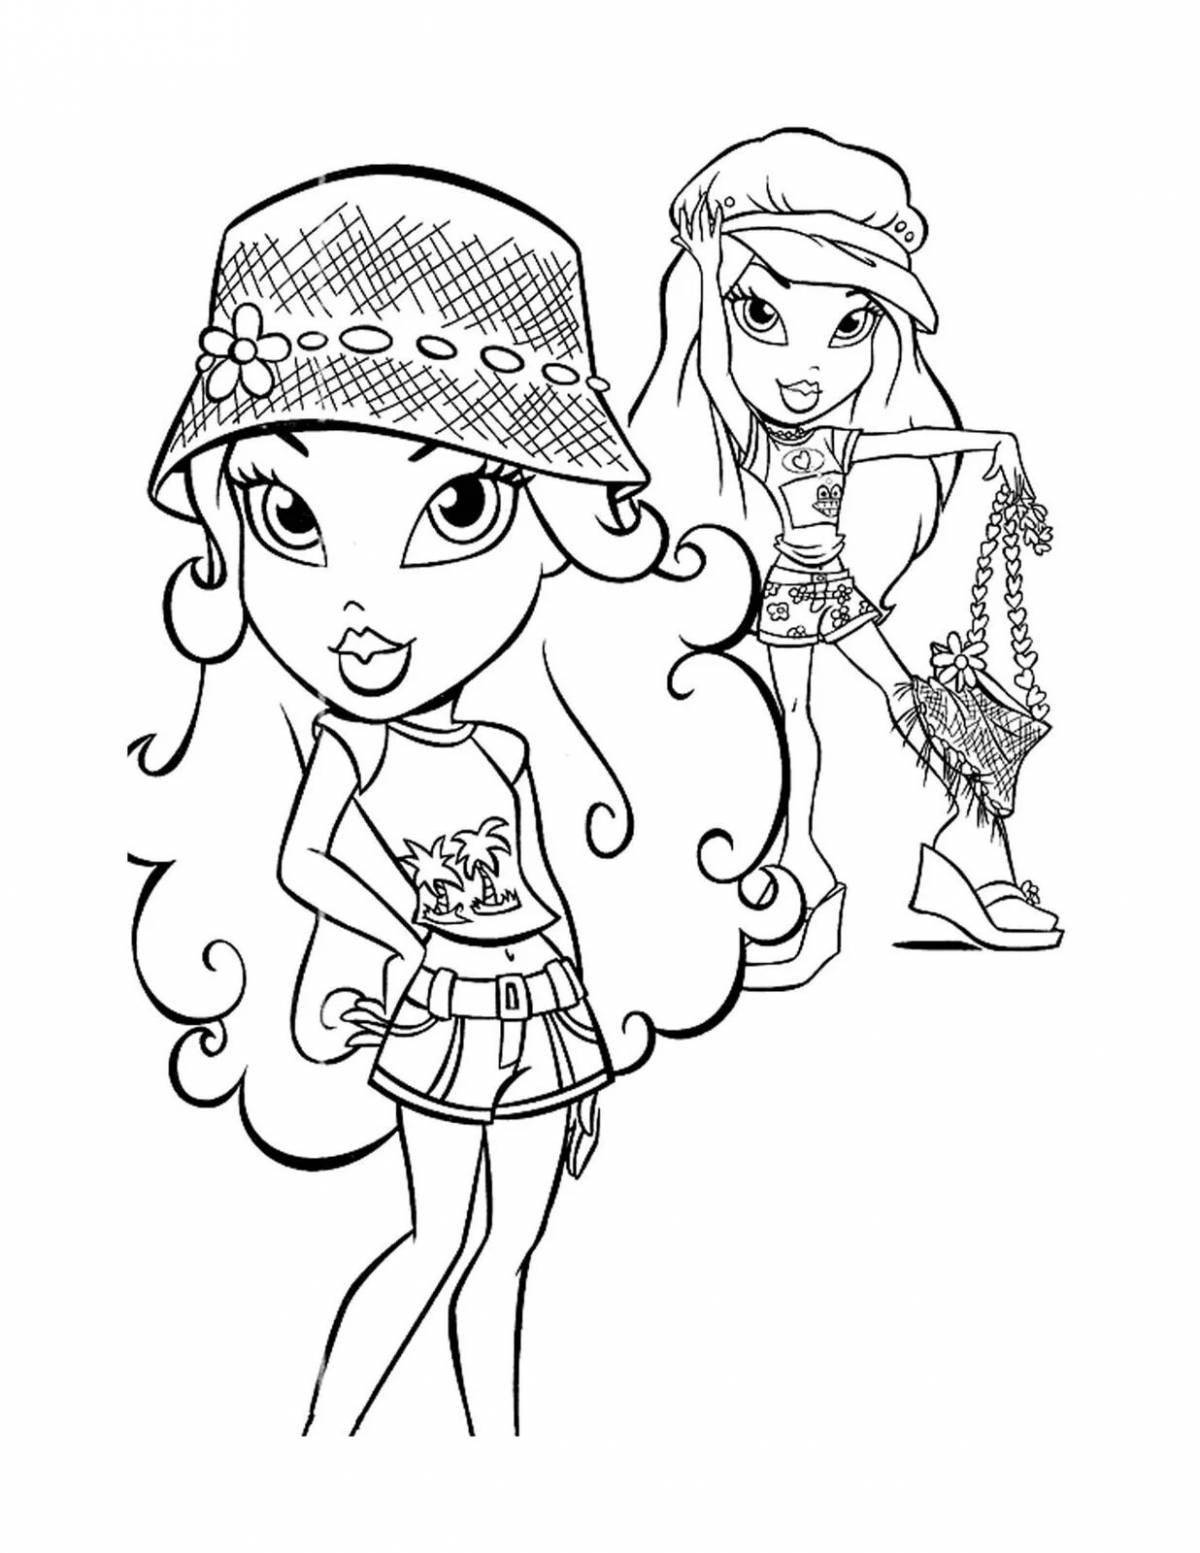 Delightful Yandex coloring pages for girls